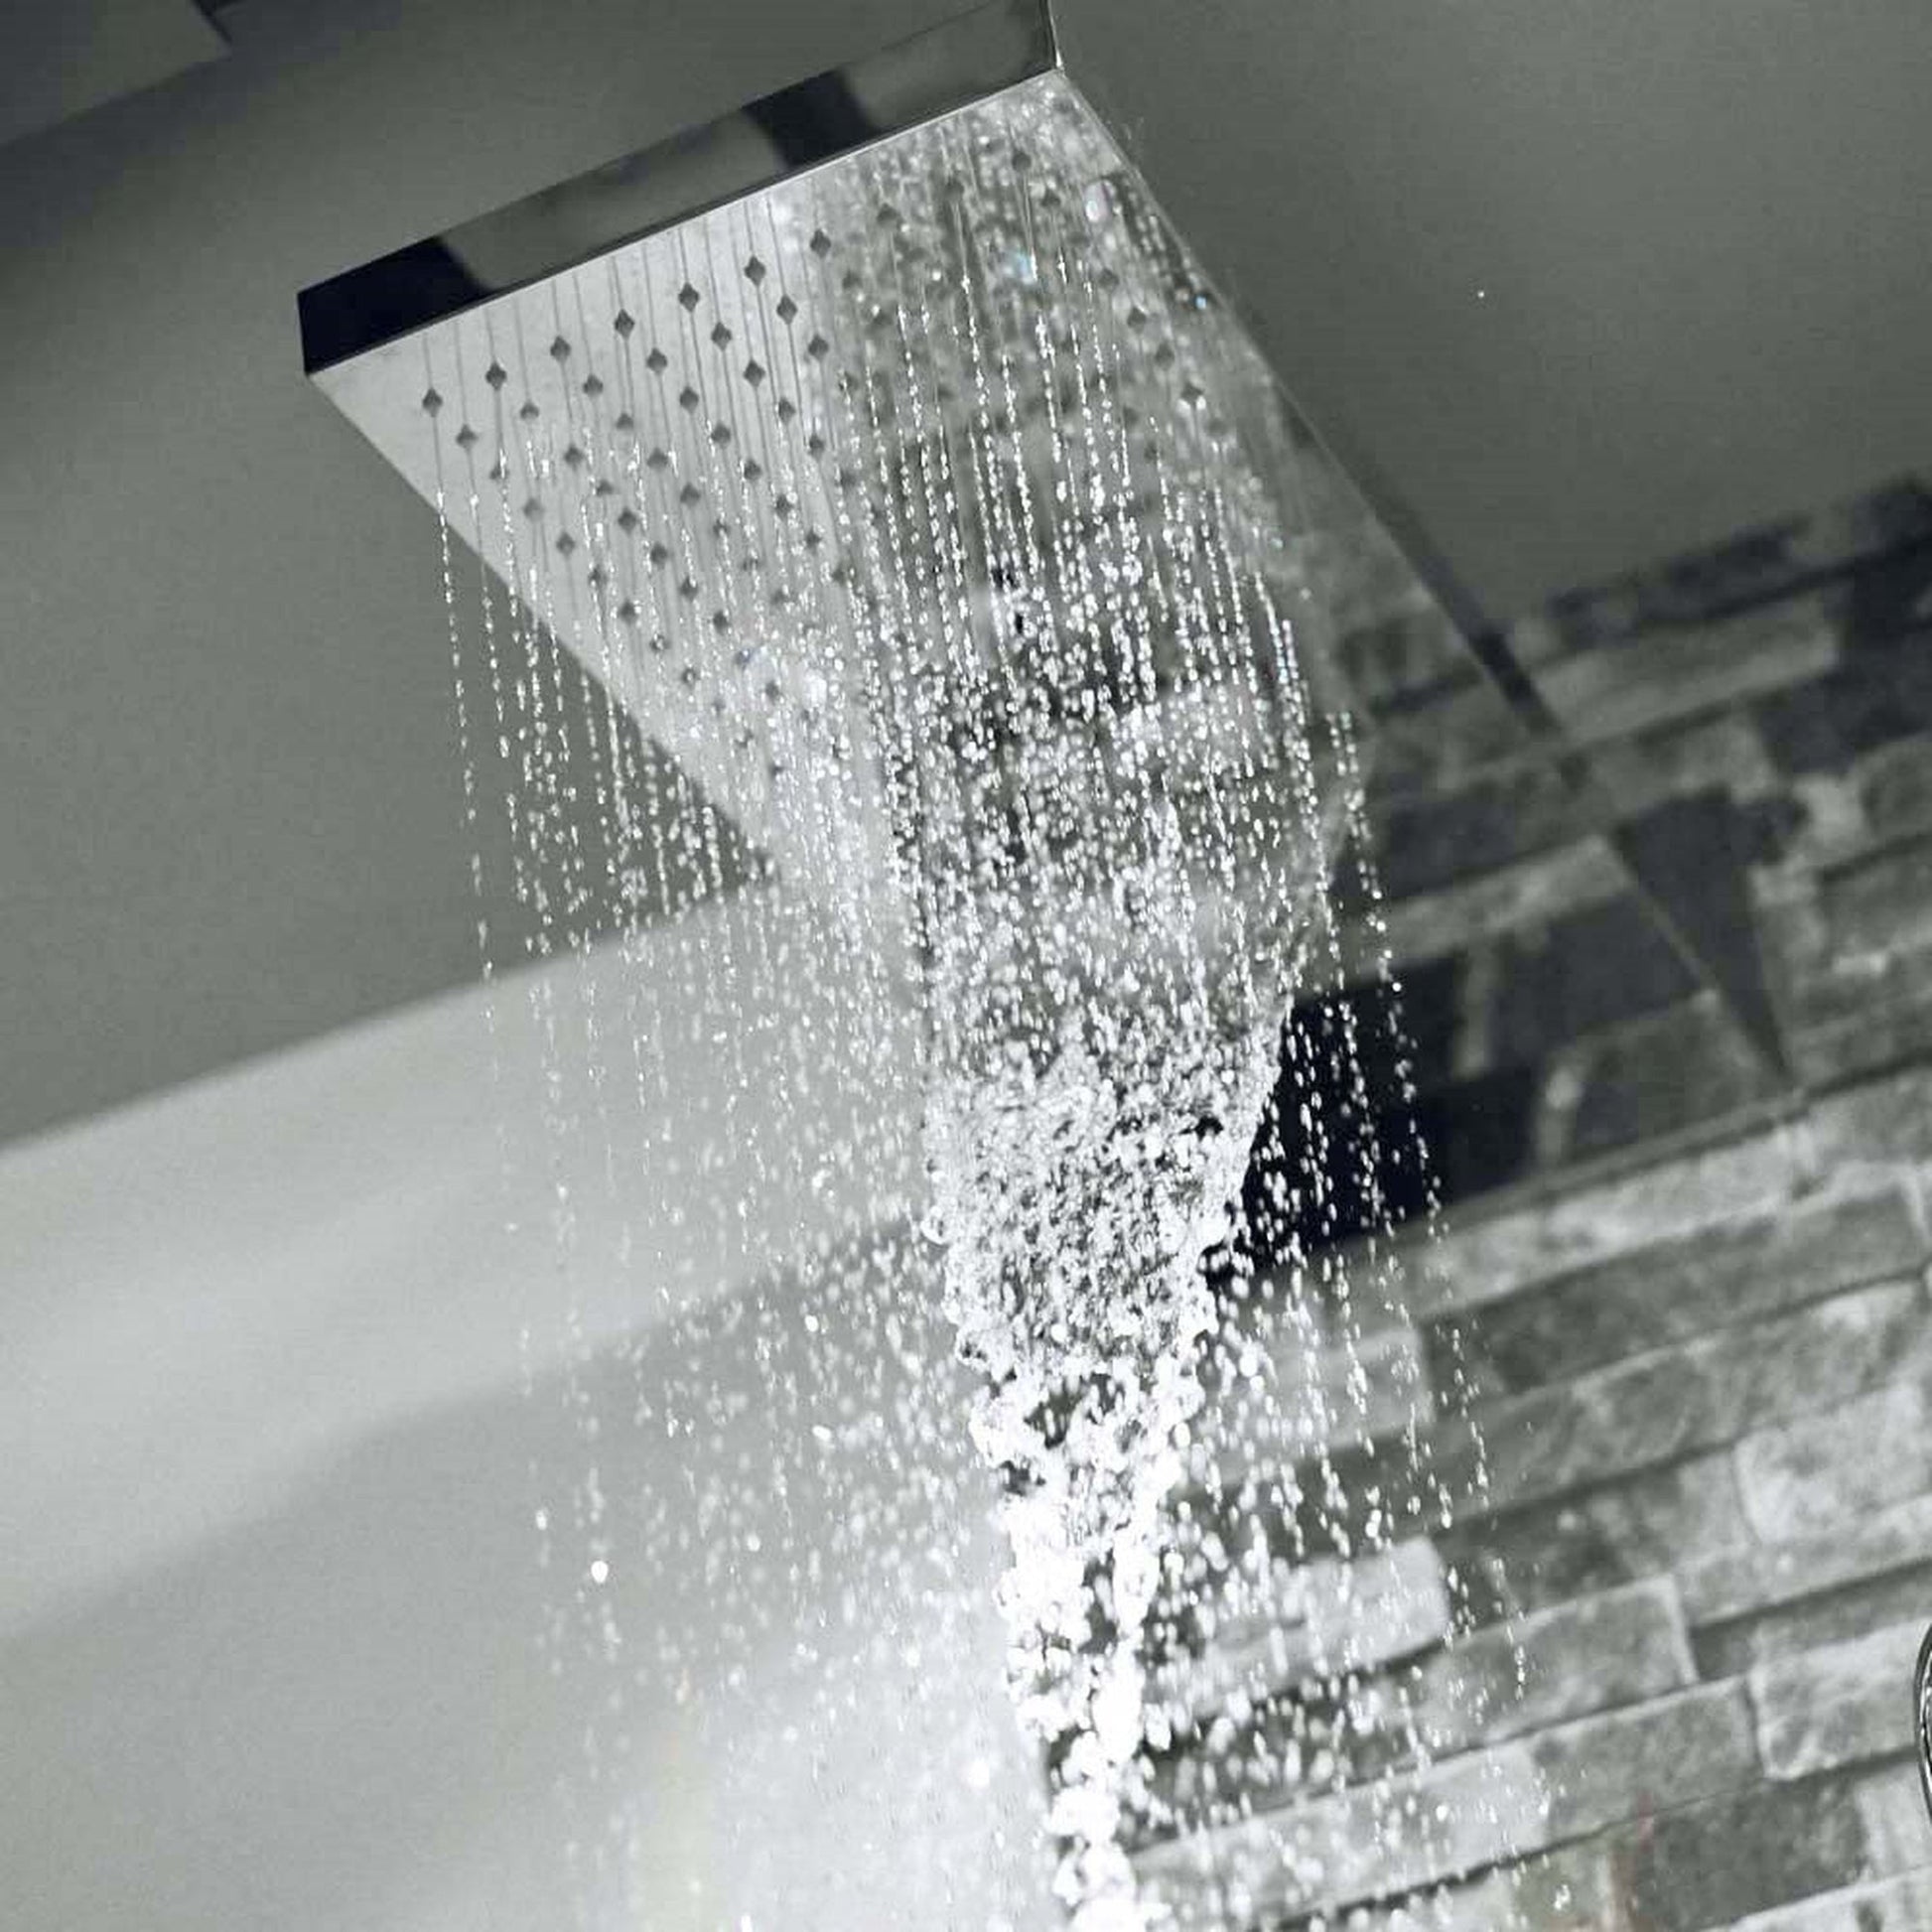 Fontana Florence Chrome Wall-Mounted Waterfall Rainfall Shower System With Hand Shower and Faucet Spout